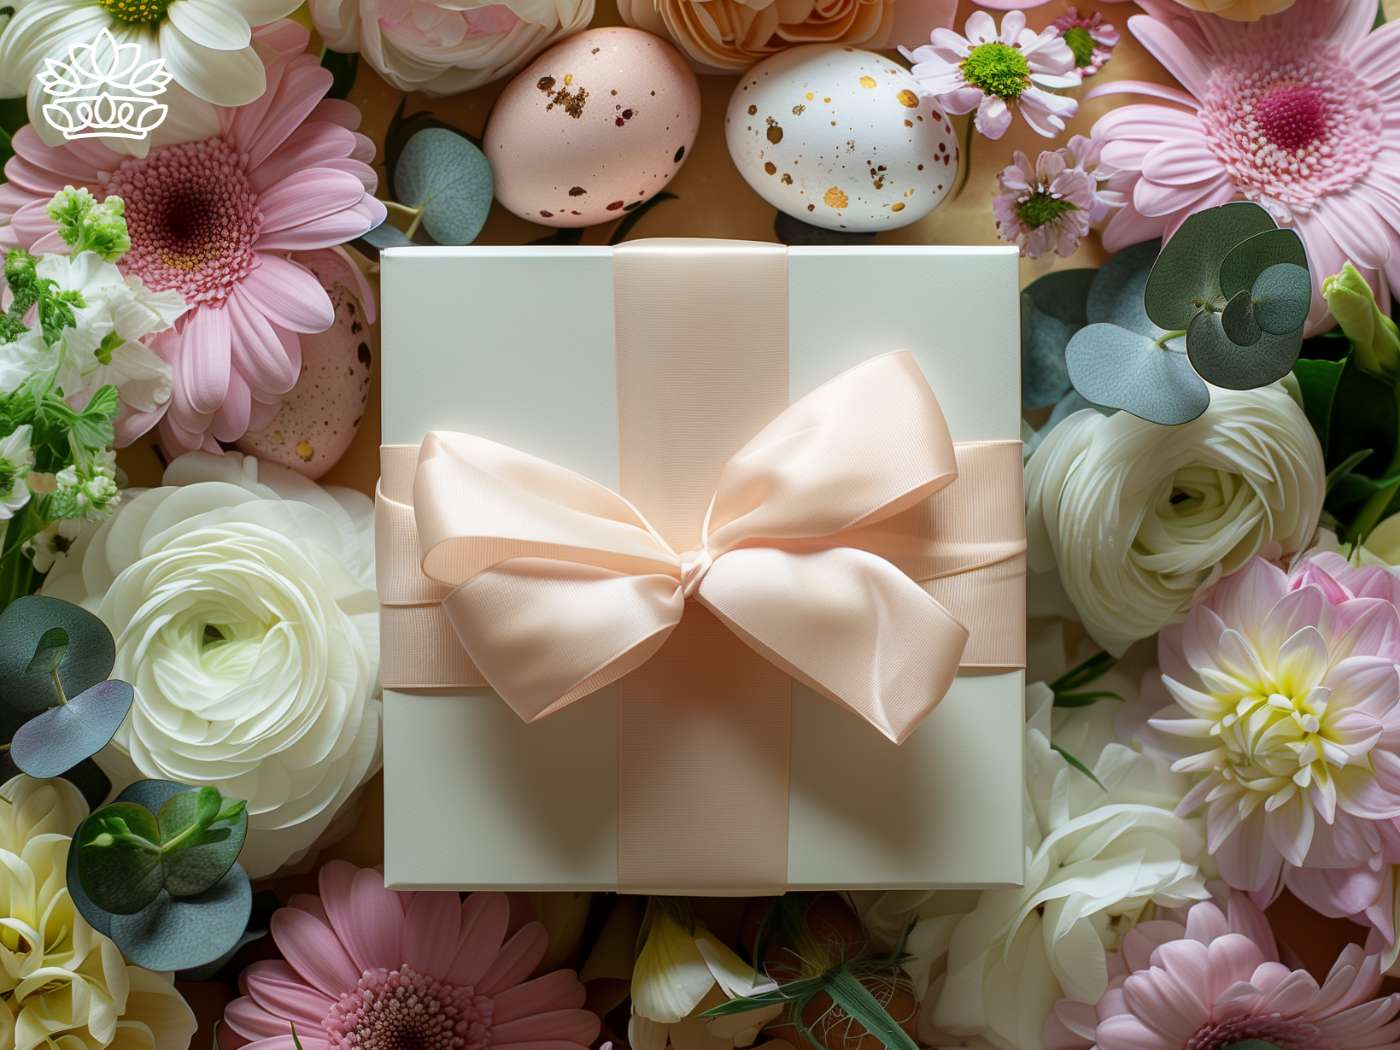 Elegant gift box with peach ribbon surrounded by a colorful assortment of flowers and decorative Easter eggs, a part of the crafty and vibrant Easter Collection by Fabulous Flowers and Gifts.